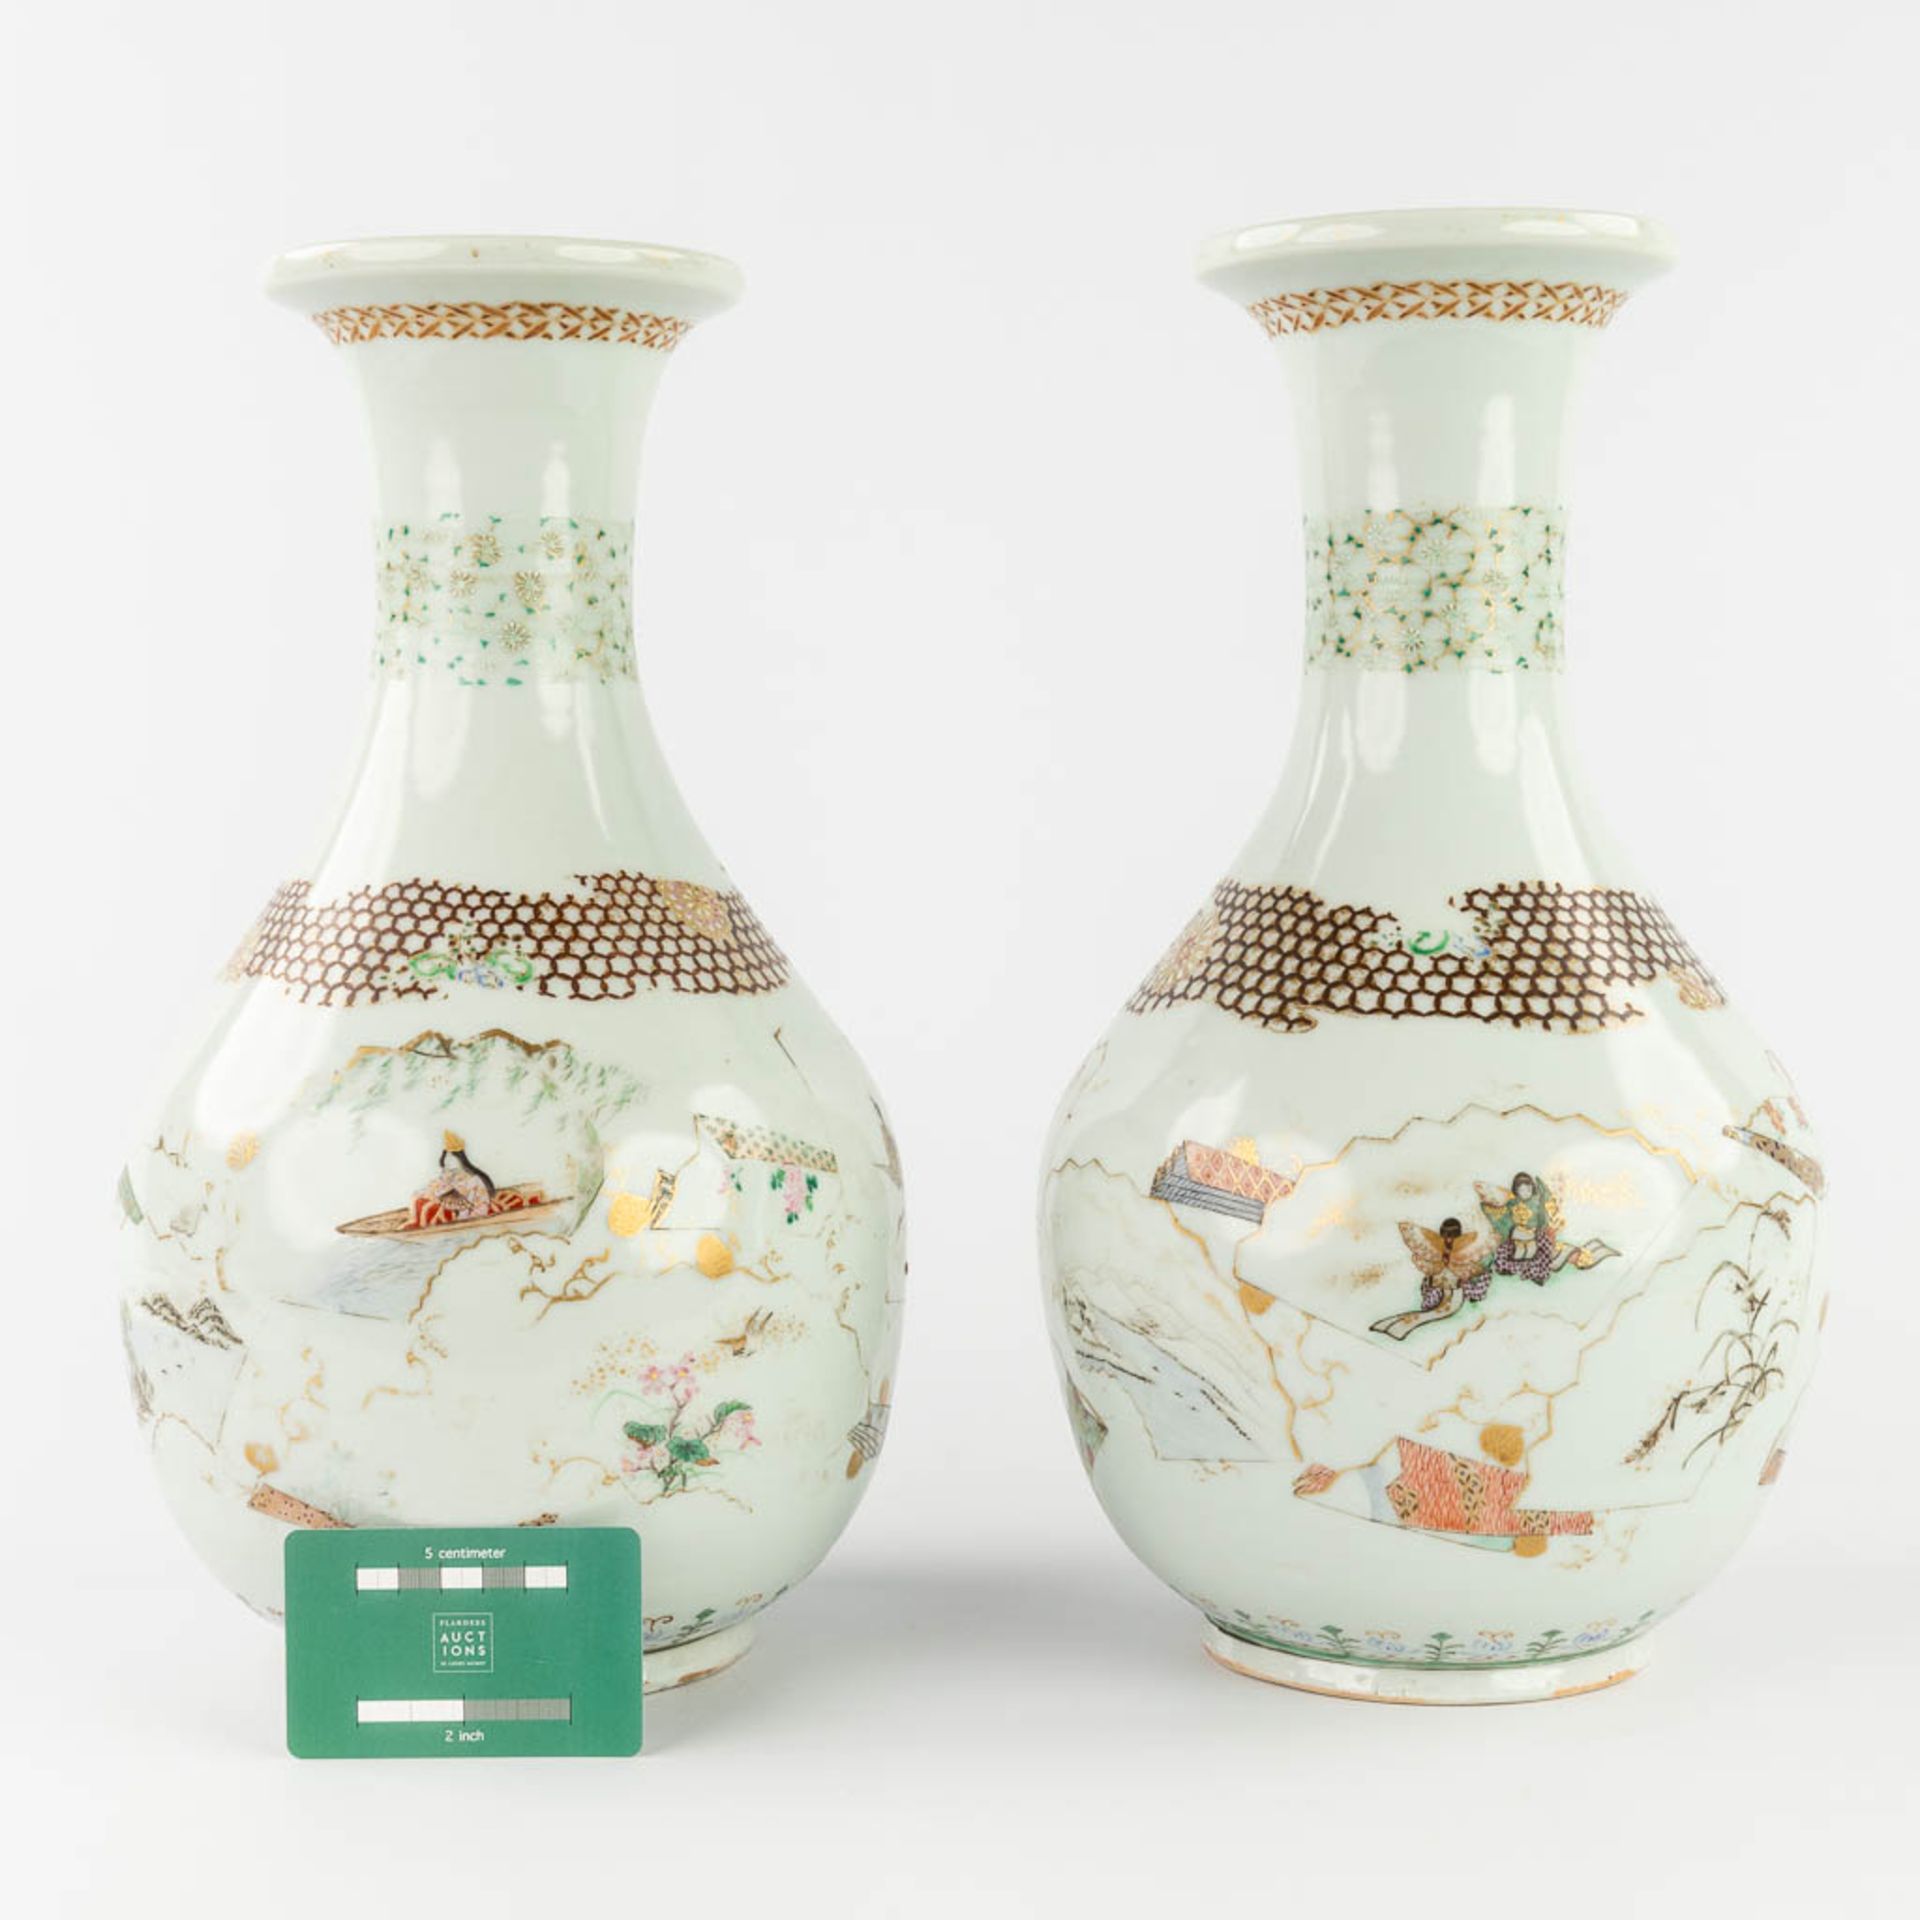 A pair of Japanese vases, decorated with hand-painted landscapes. 19th C. (H:37,5 x D:21 cm) - Image 2 of 15